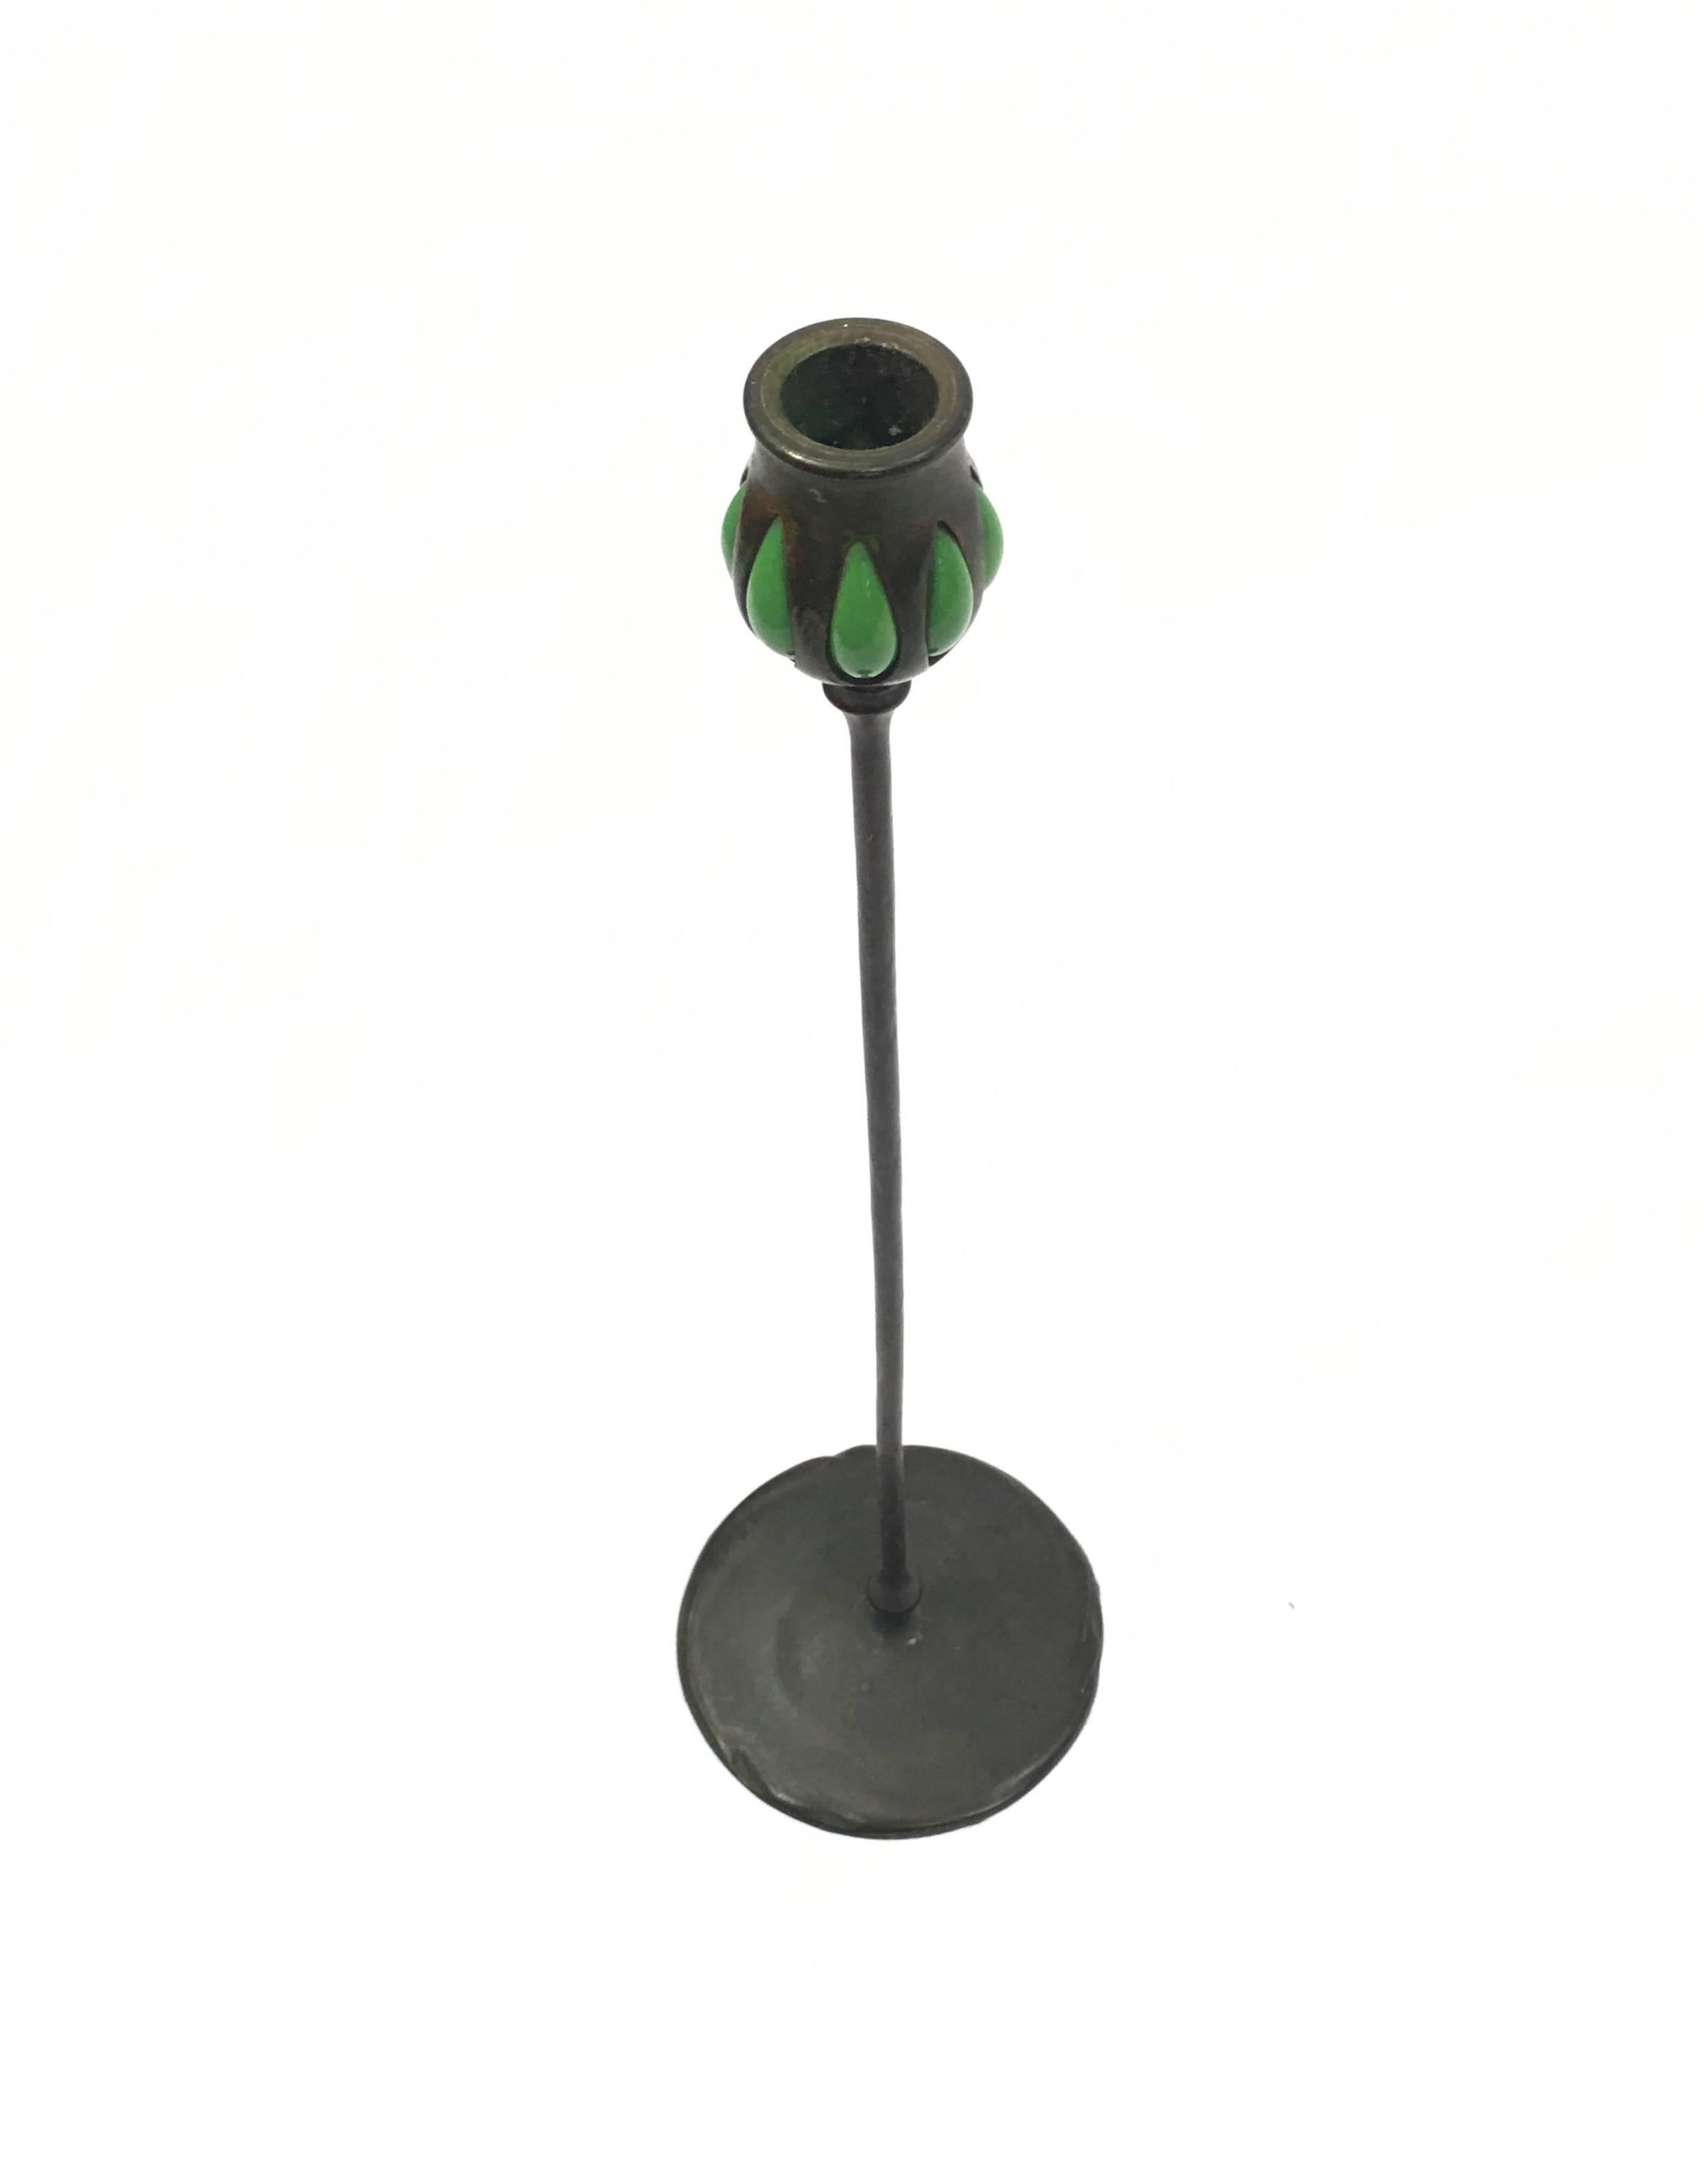 The bronze candlestick is signed Tiffany Studios, New York. The pierced bronze portion has handblown green glass with inspiration of nature. It is numbered 5393.